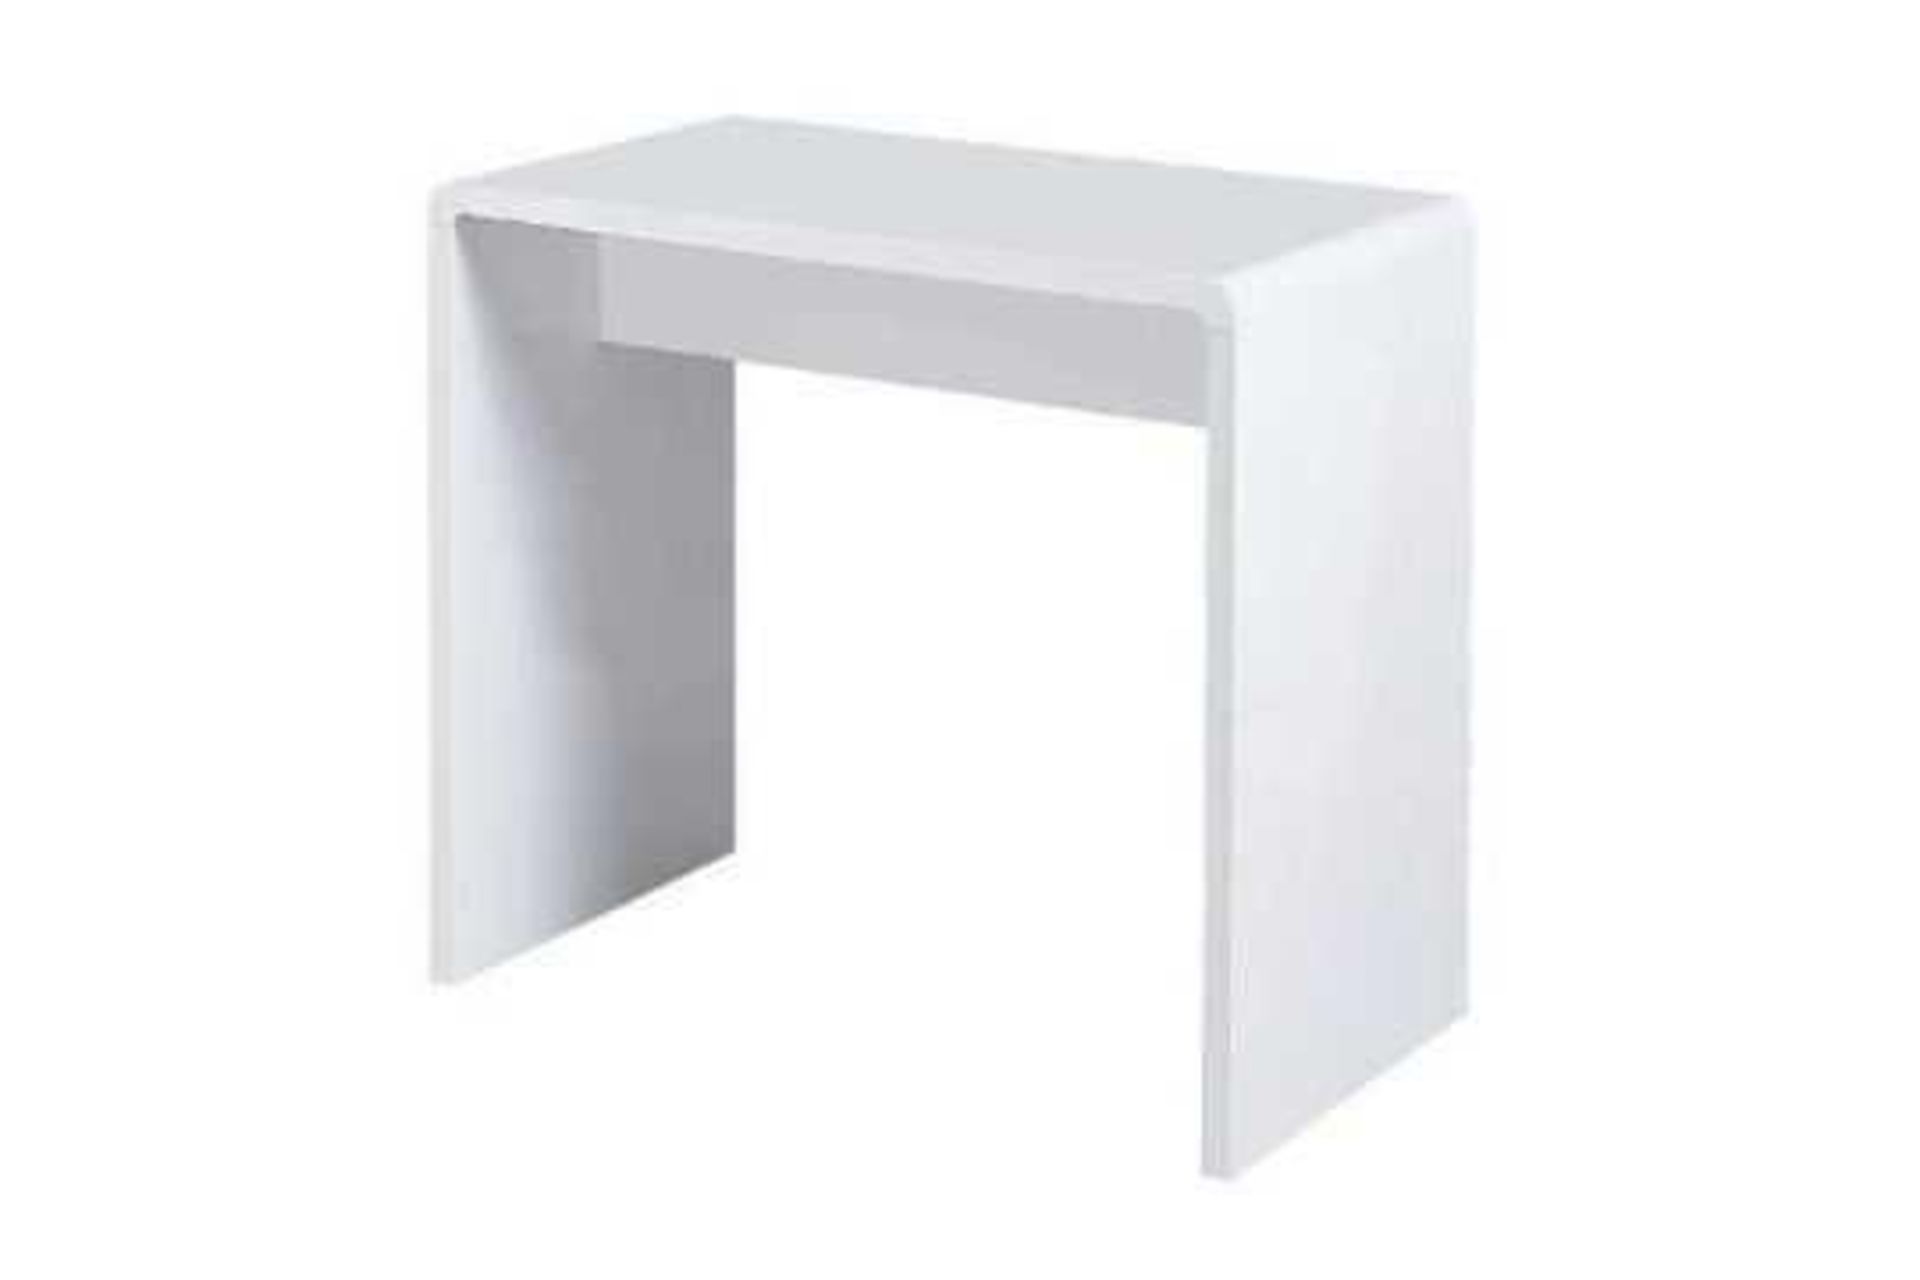 Boxed Furniture In Fashion Rectangular White Gloss Glacier Bar Table RRP £249(Pictures Are For